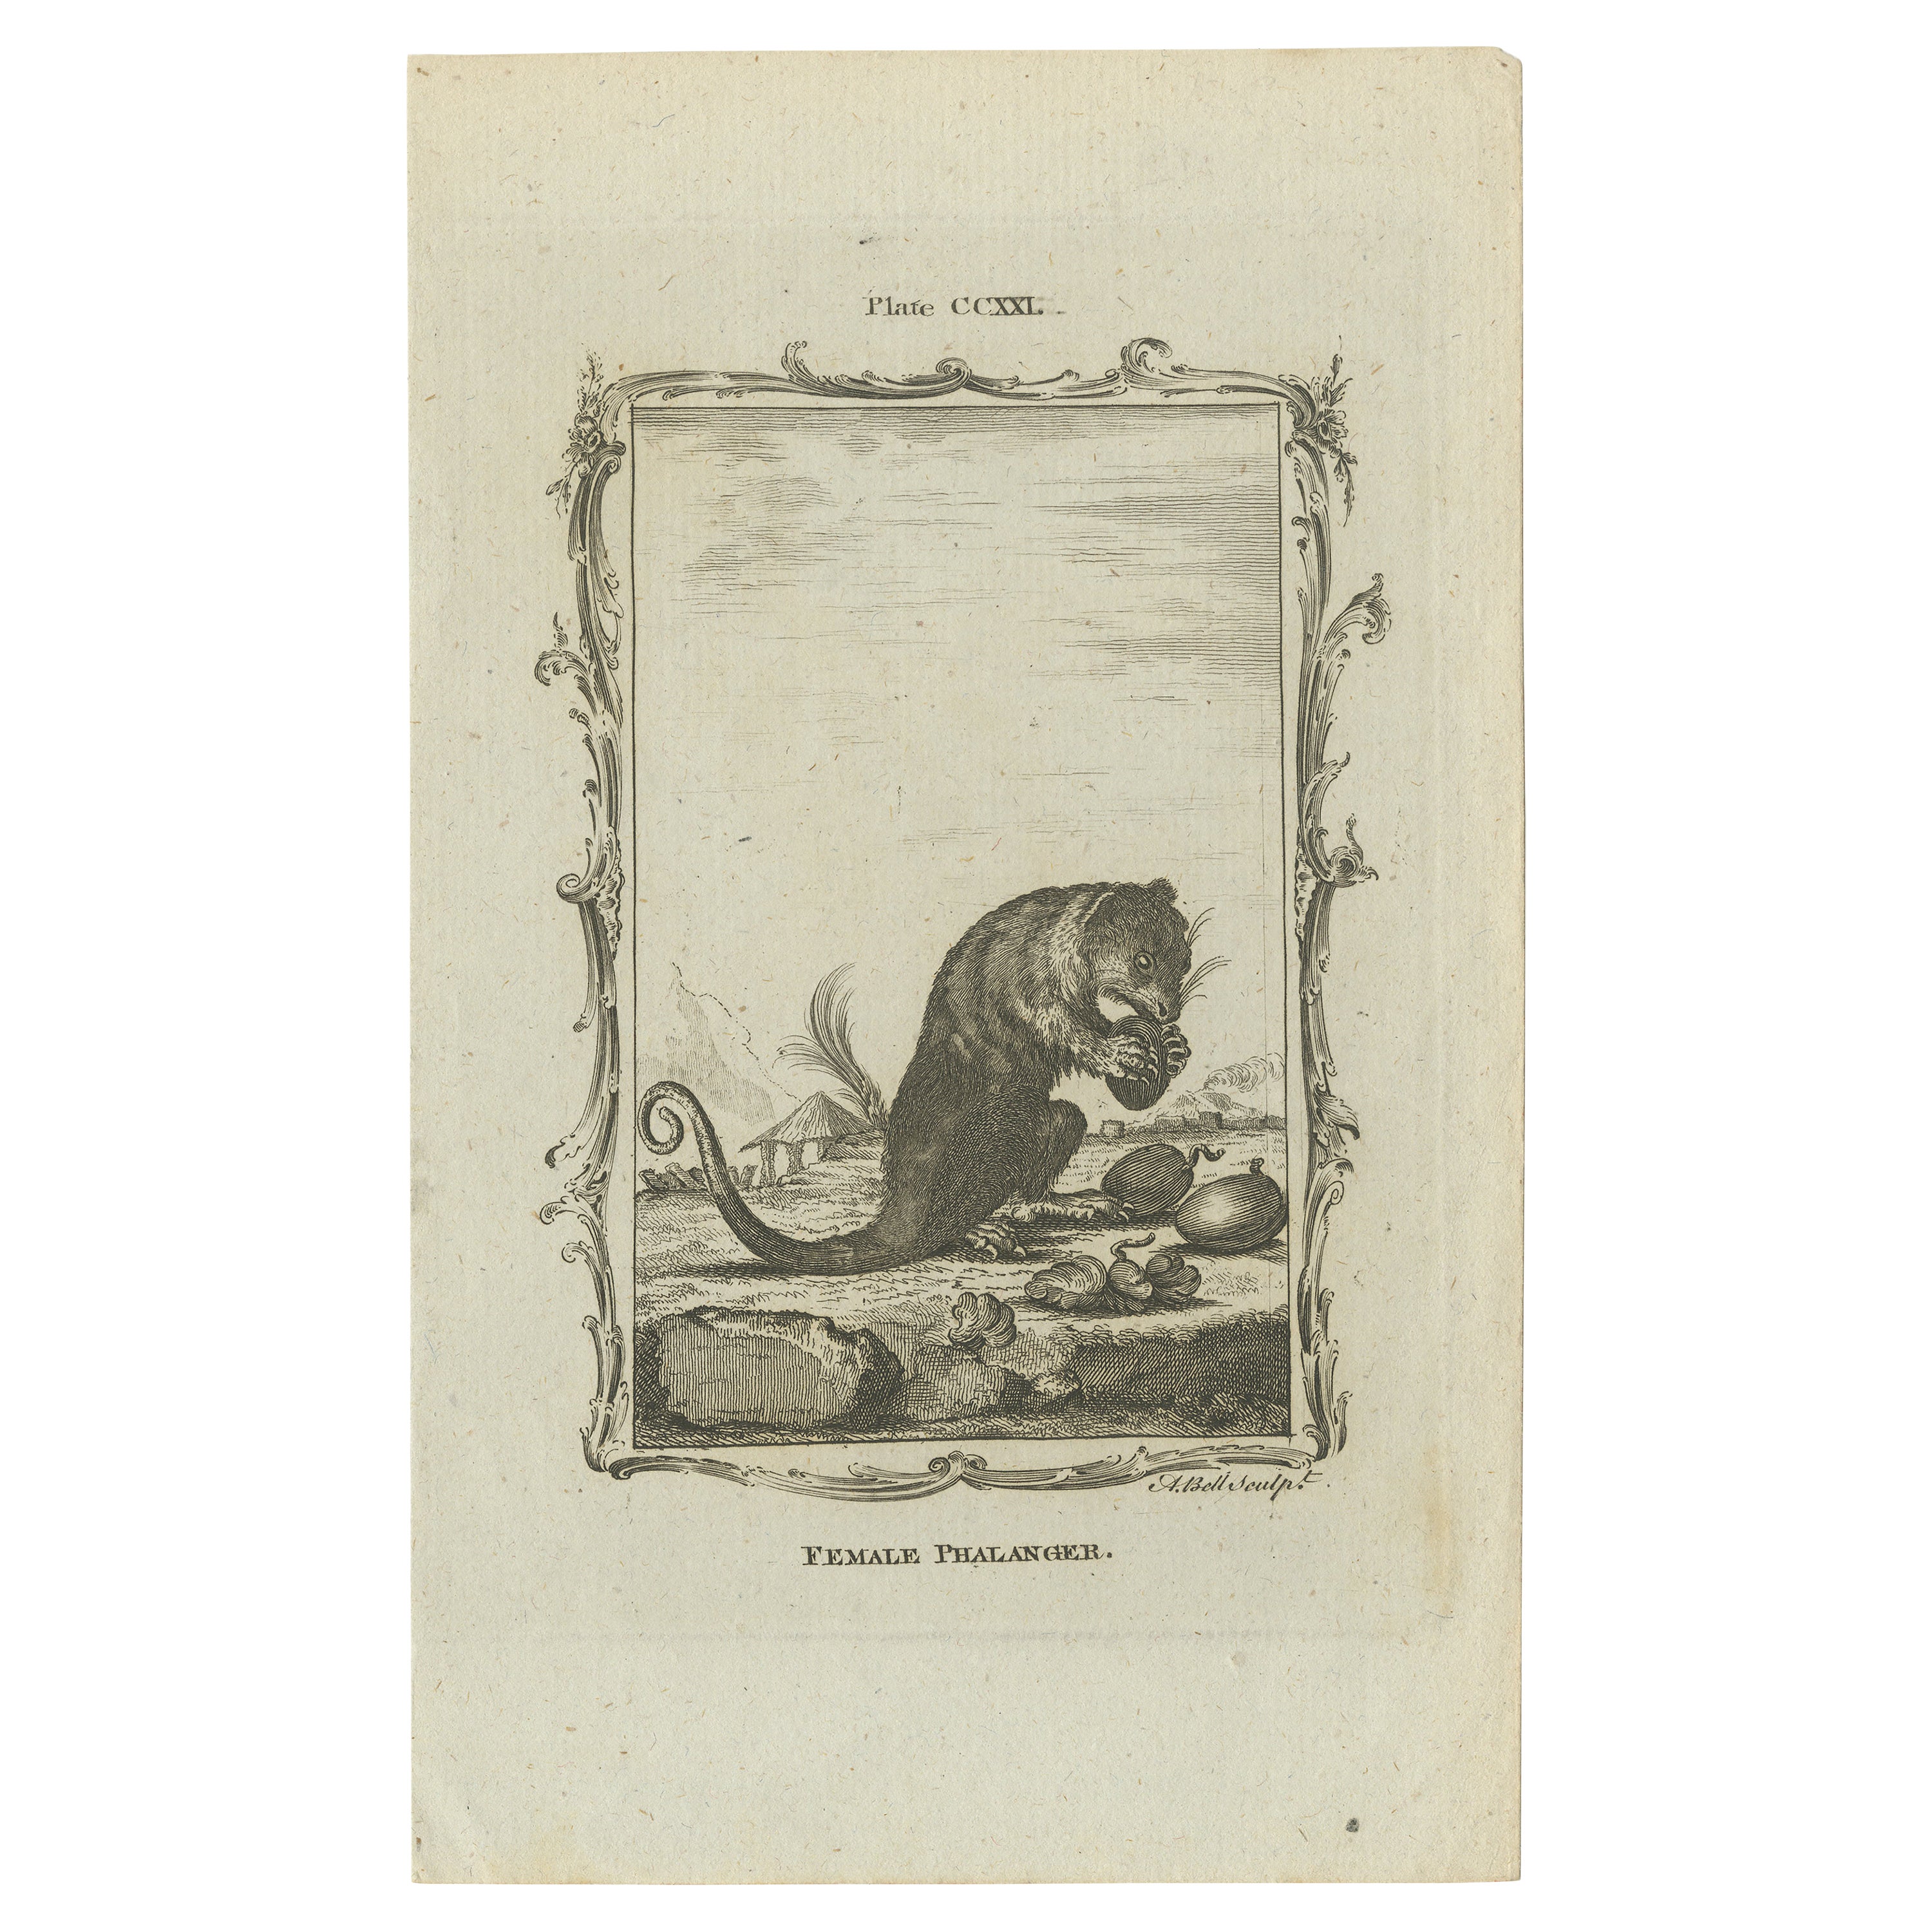 Antique Print of a Female Phalanger by Bell 'c.1800' For Sale